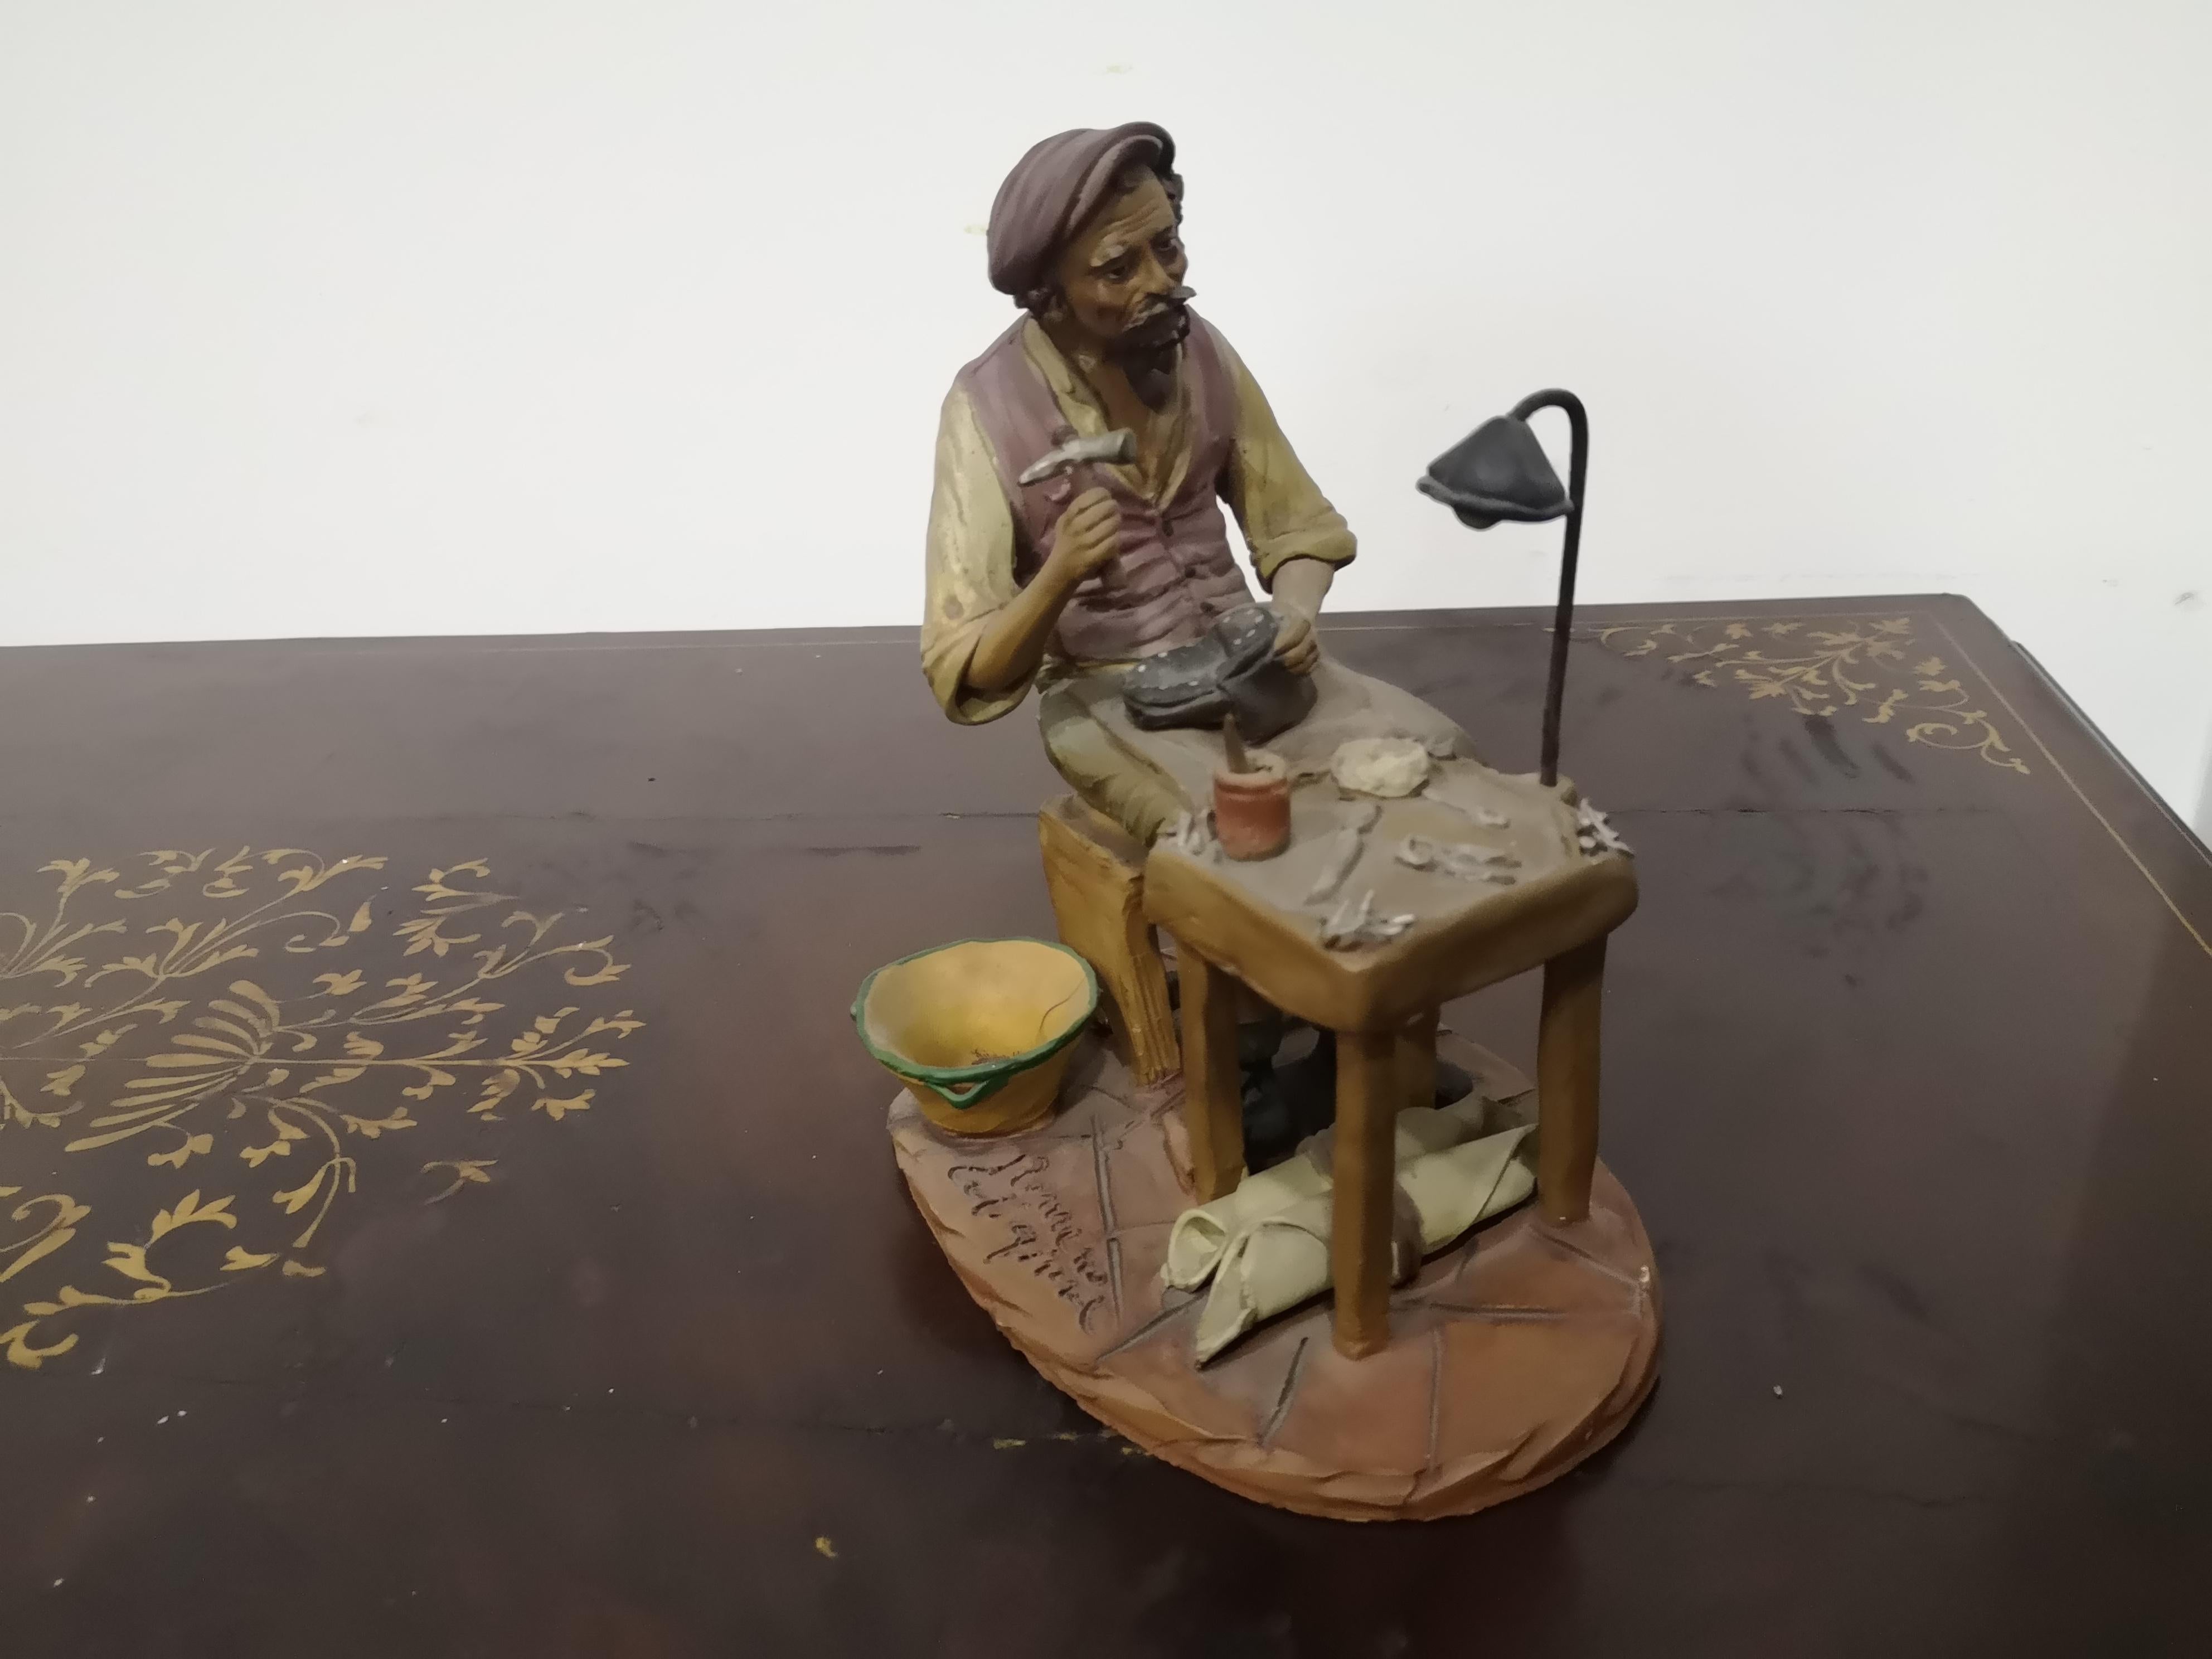 Beautiful Caltagirone figurine by Gaetano Romano from the 1960s
polychrome terracotta depicting a cobbler in his everyday life.
The figurine measures:
Height       cm 20
Length 17 cm
Width cm  12